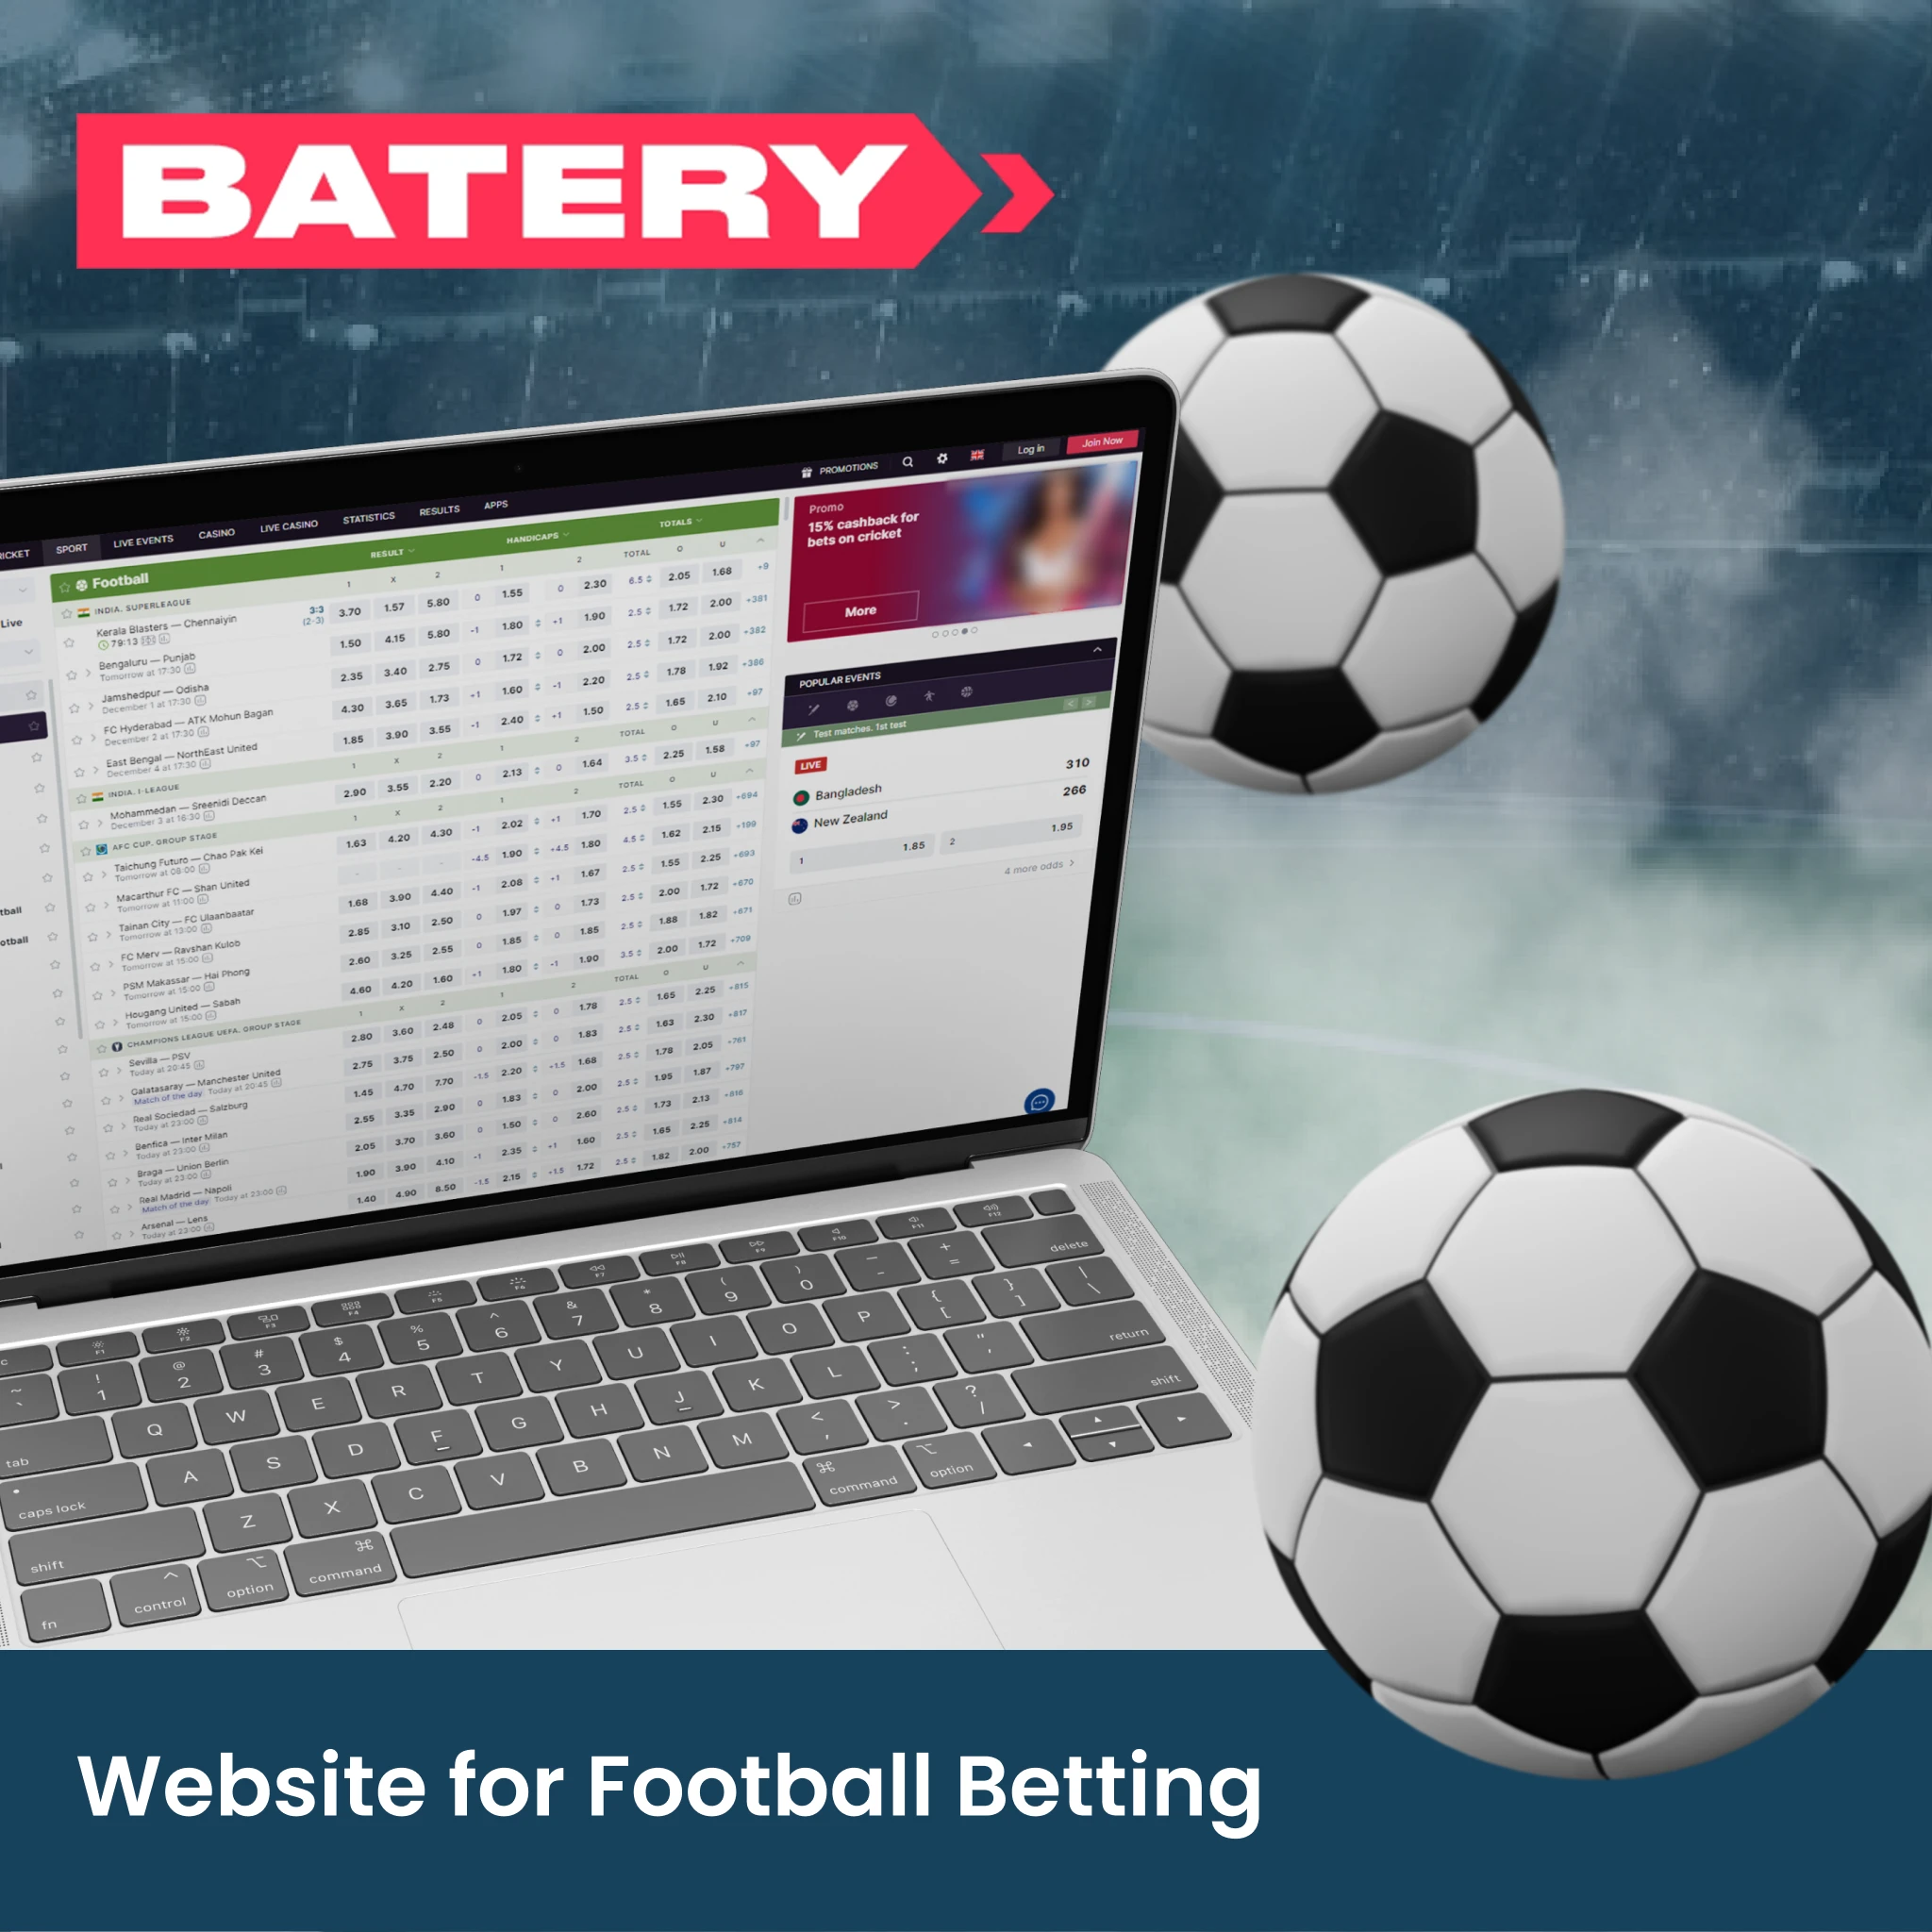 You can place bets on the football championships on the Batery website.